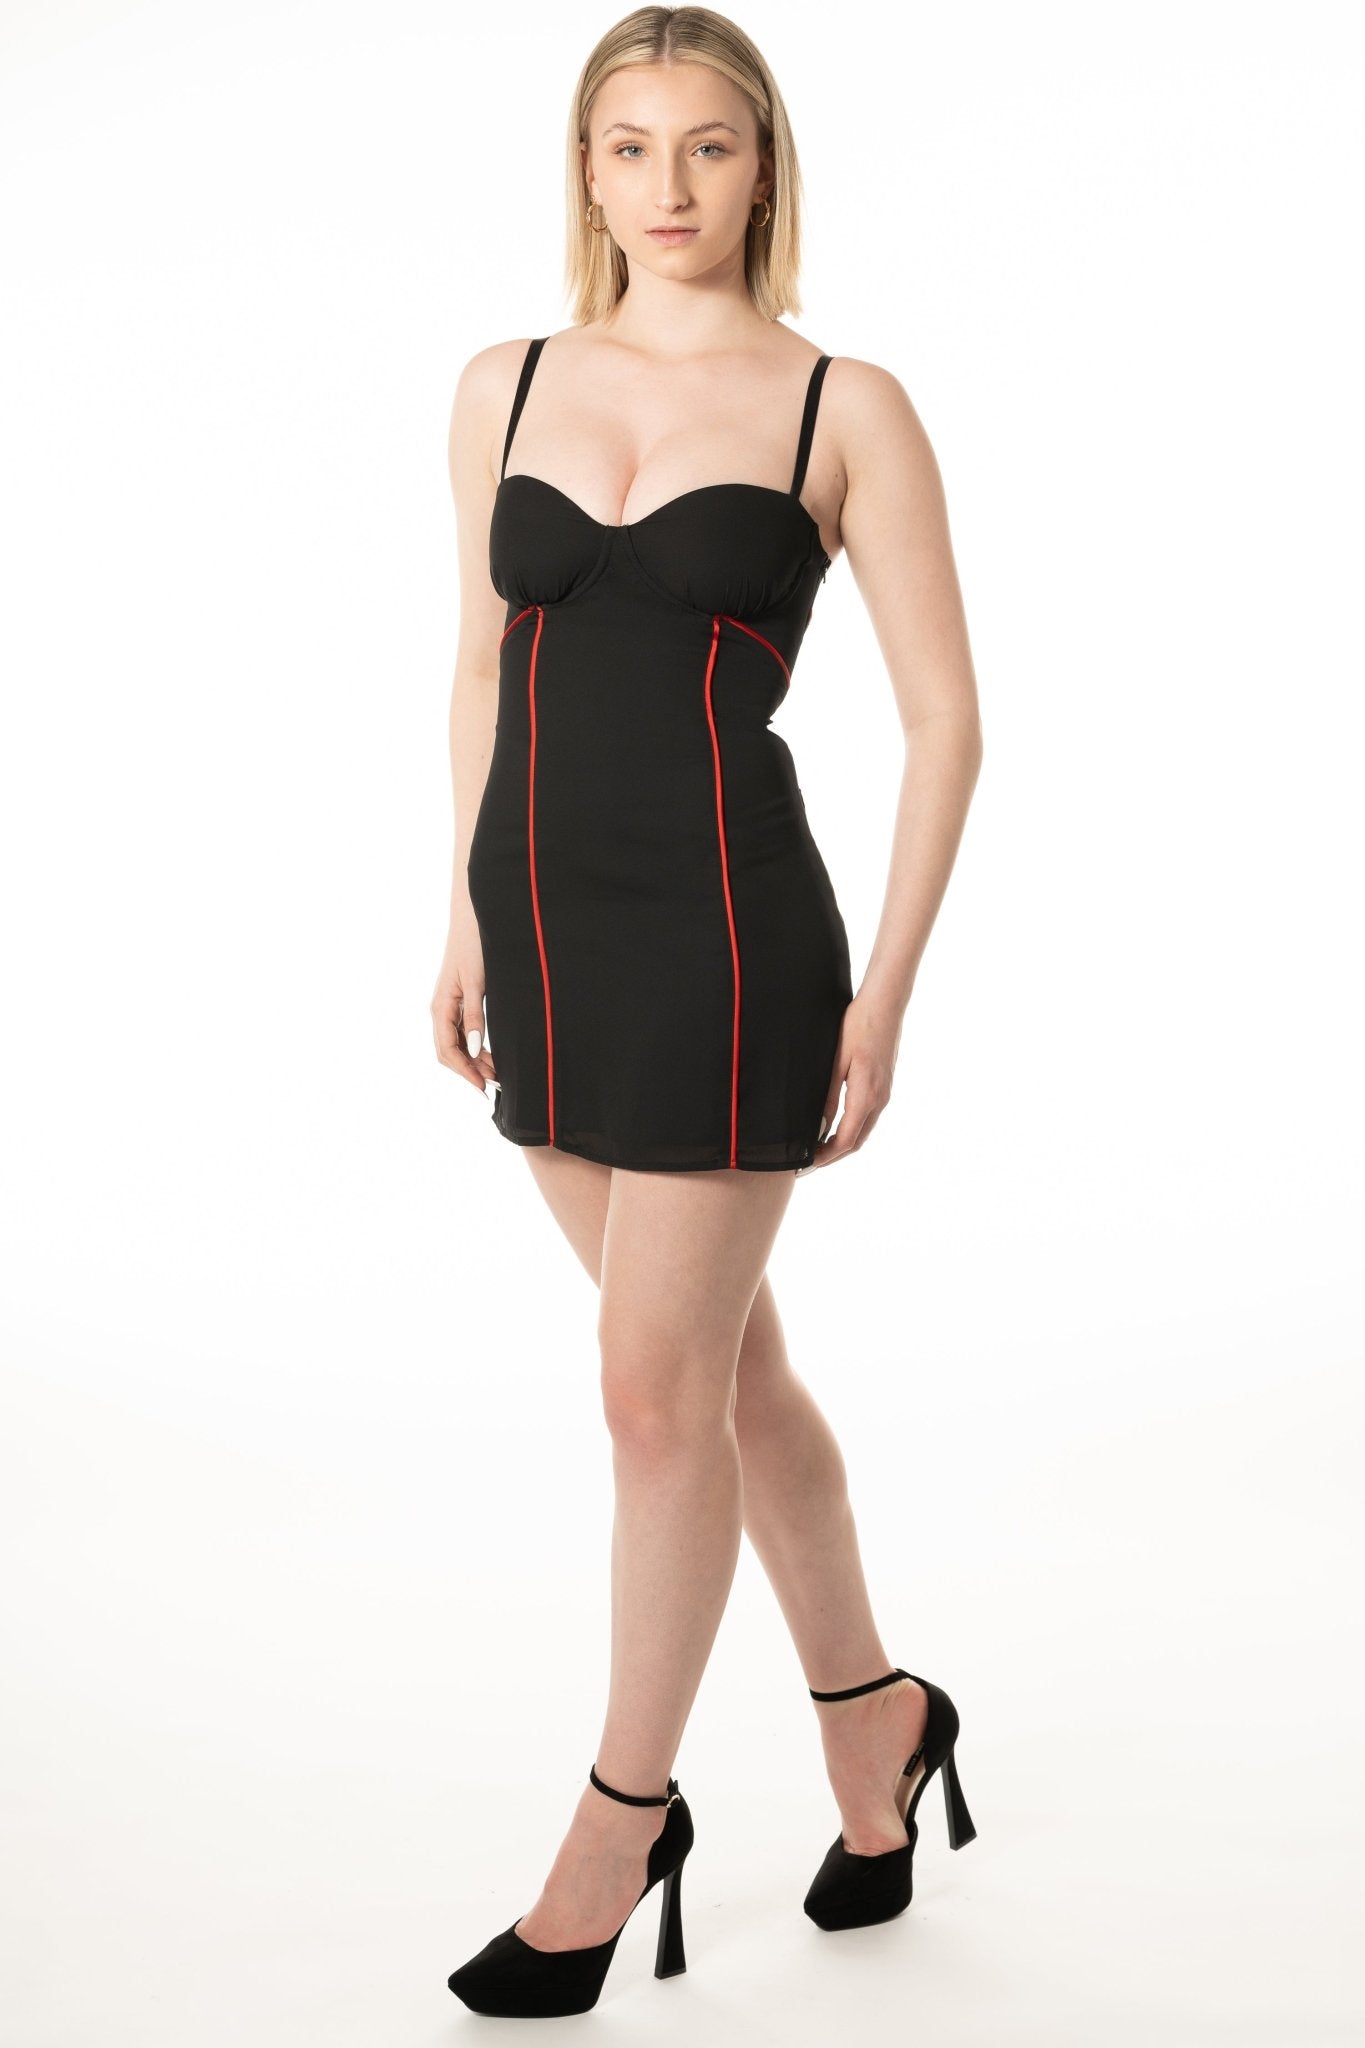 THEA Cocktail Server Uniform Dress for gaming, casino, hotel, restaurants, hospitality, and resorts. Mini dress with contrast satin piping and corset top. - KAPTVA Apparel